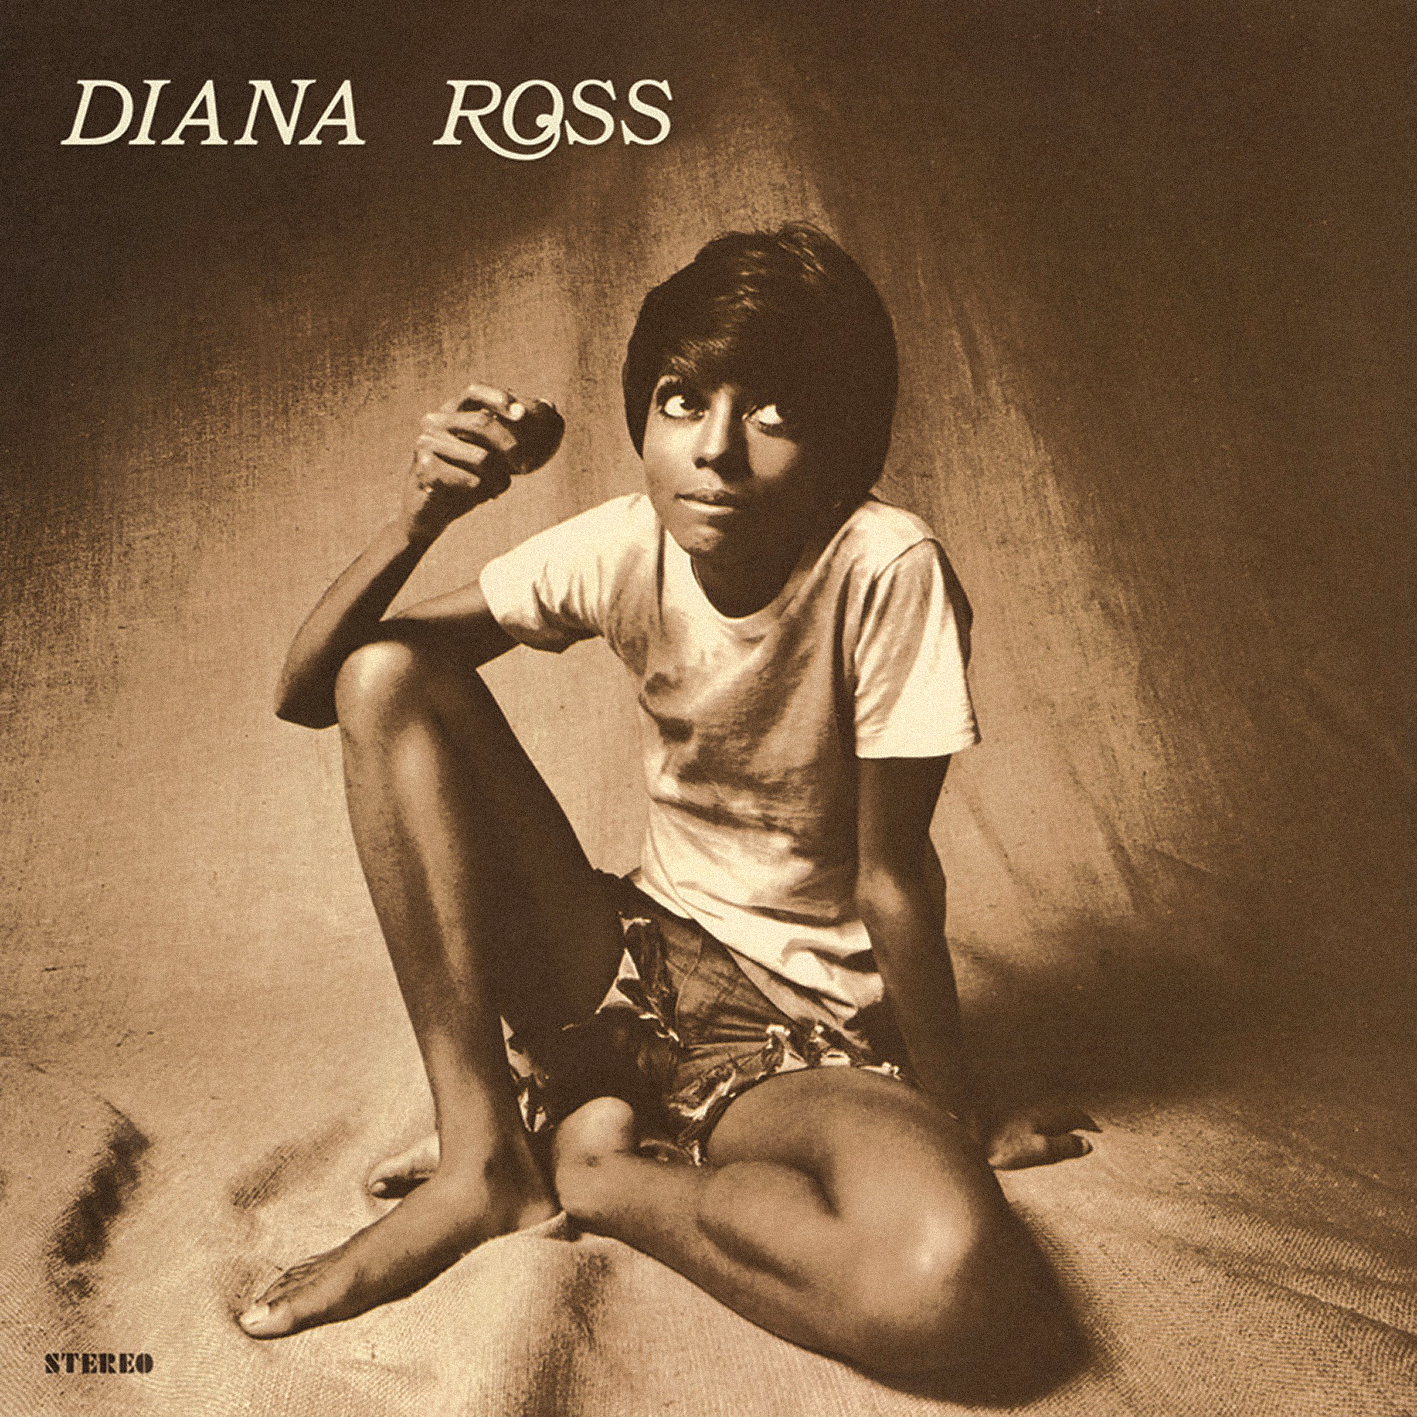 Diana Ross - 1970 - Diana Ross [2016 Mowtown Records] 24-192